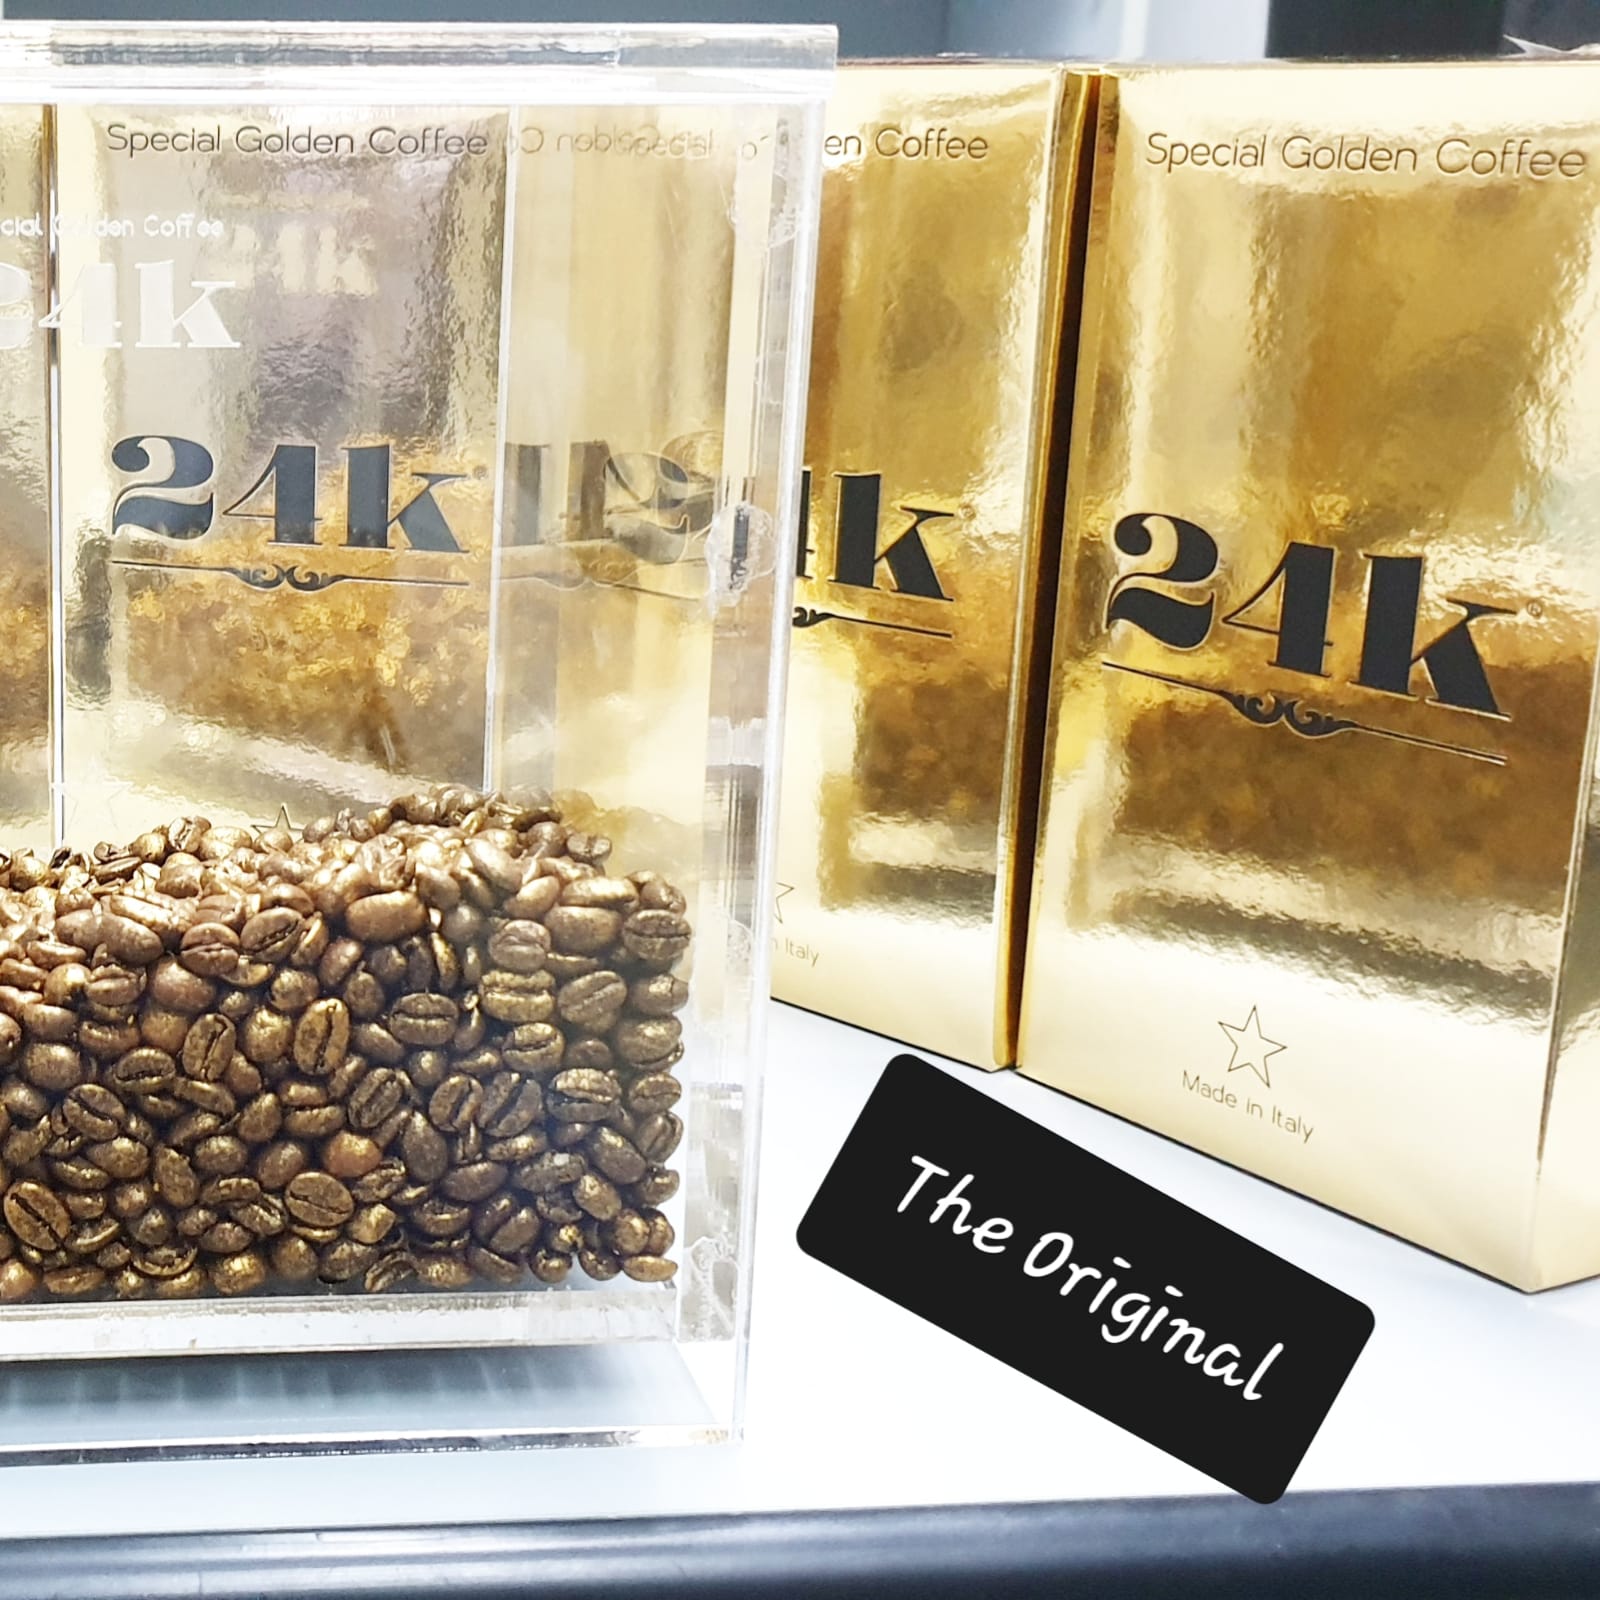 Gold special. Coffee Golden Brazil как раньше. This Company specialise on Gold and valuable Stones.